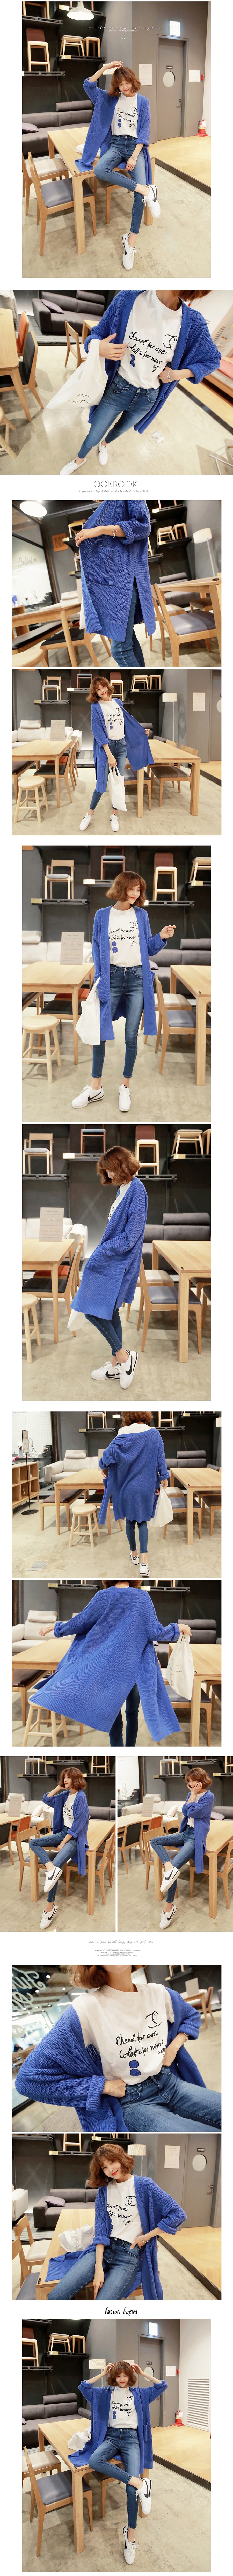 [2018 S/S New] Loose Open Cardigan #Blue One Size(Free)